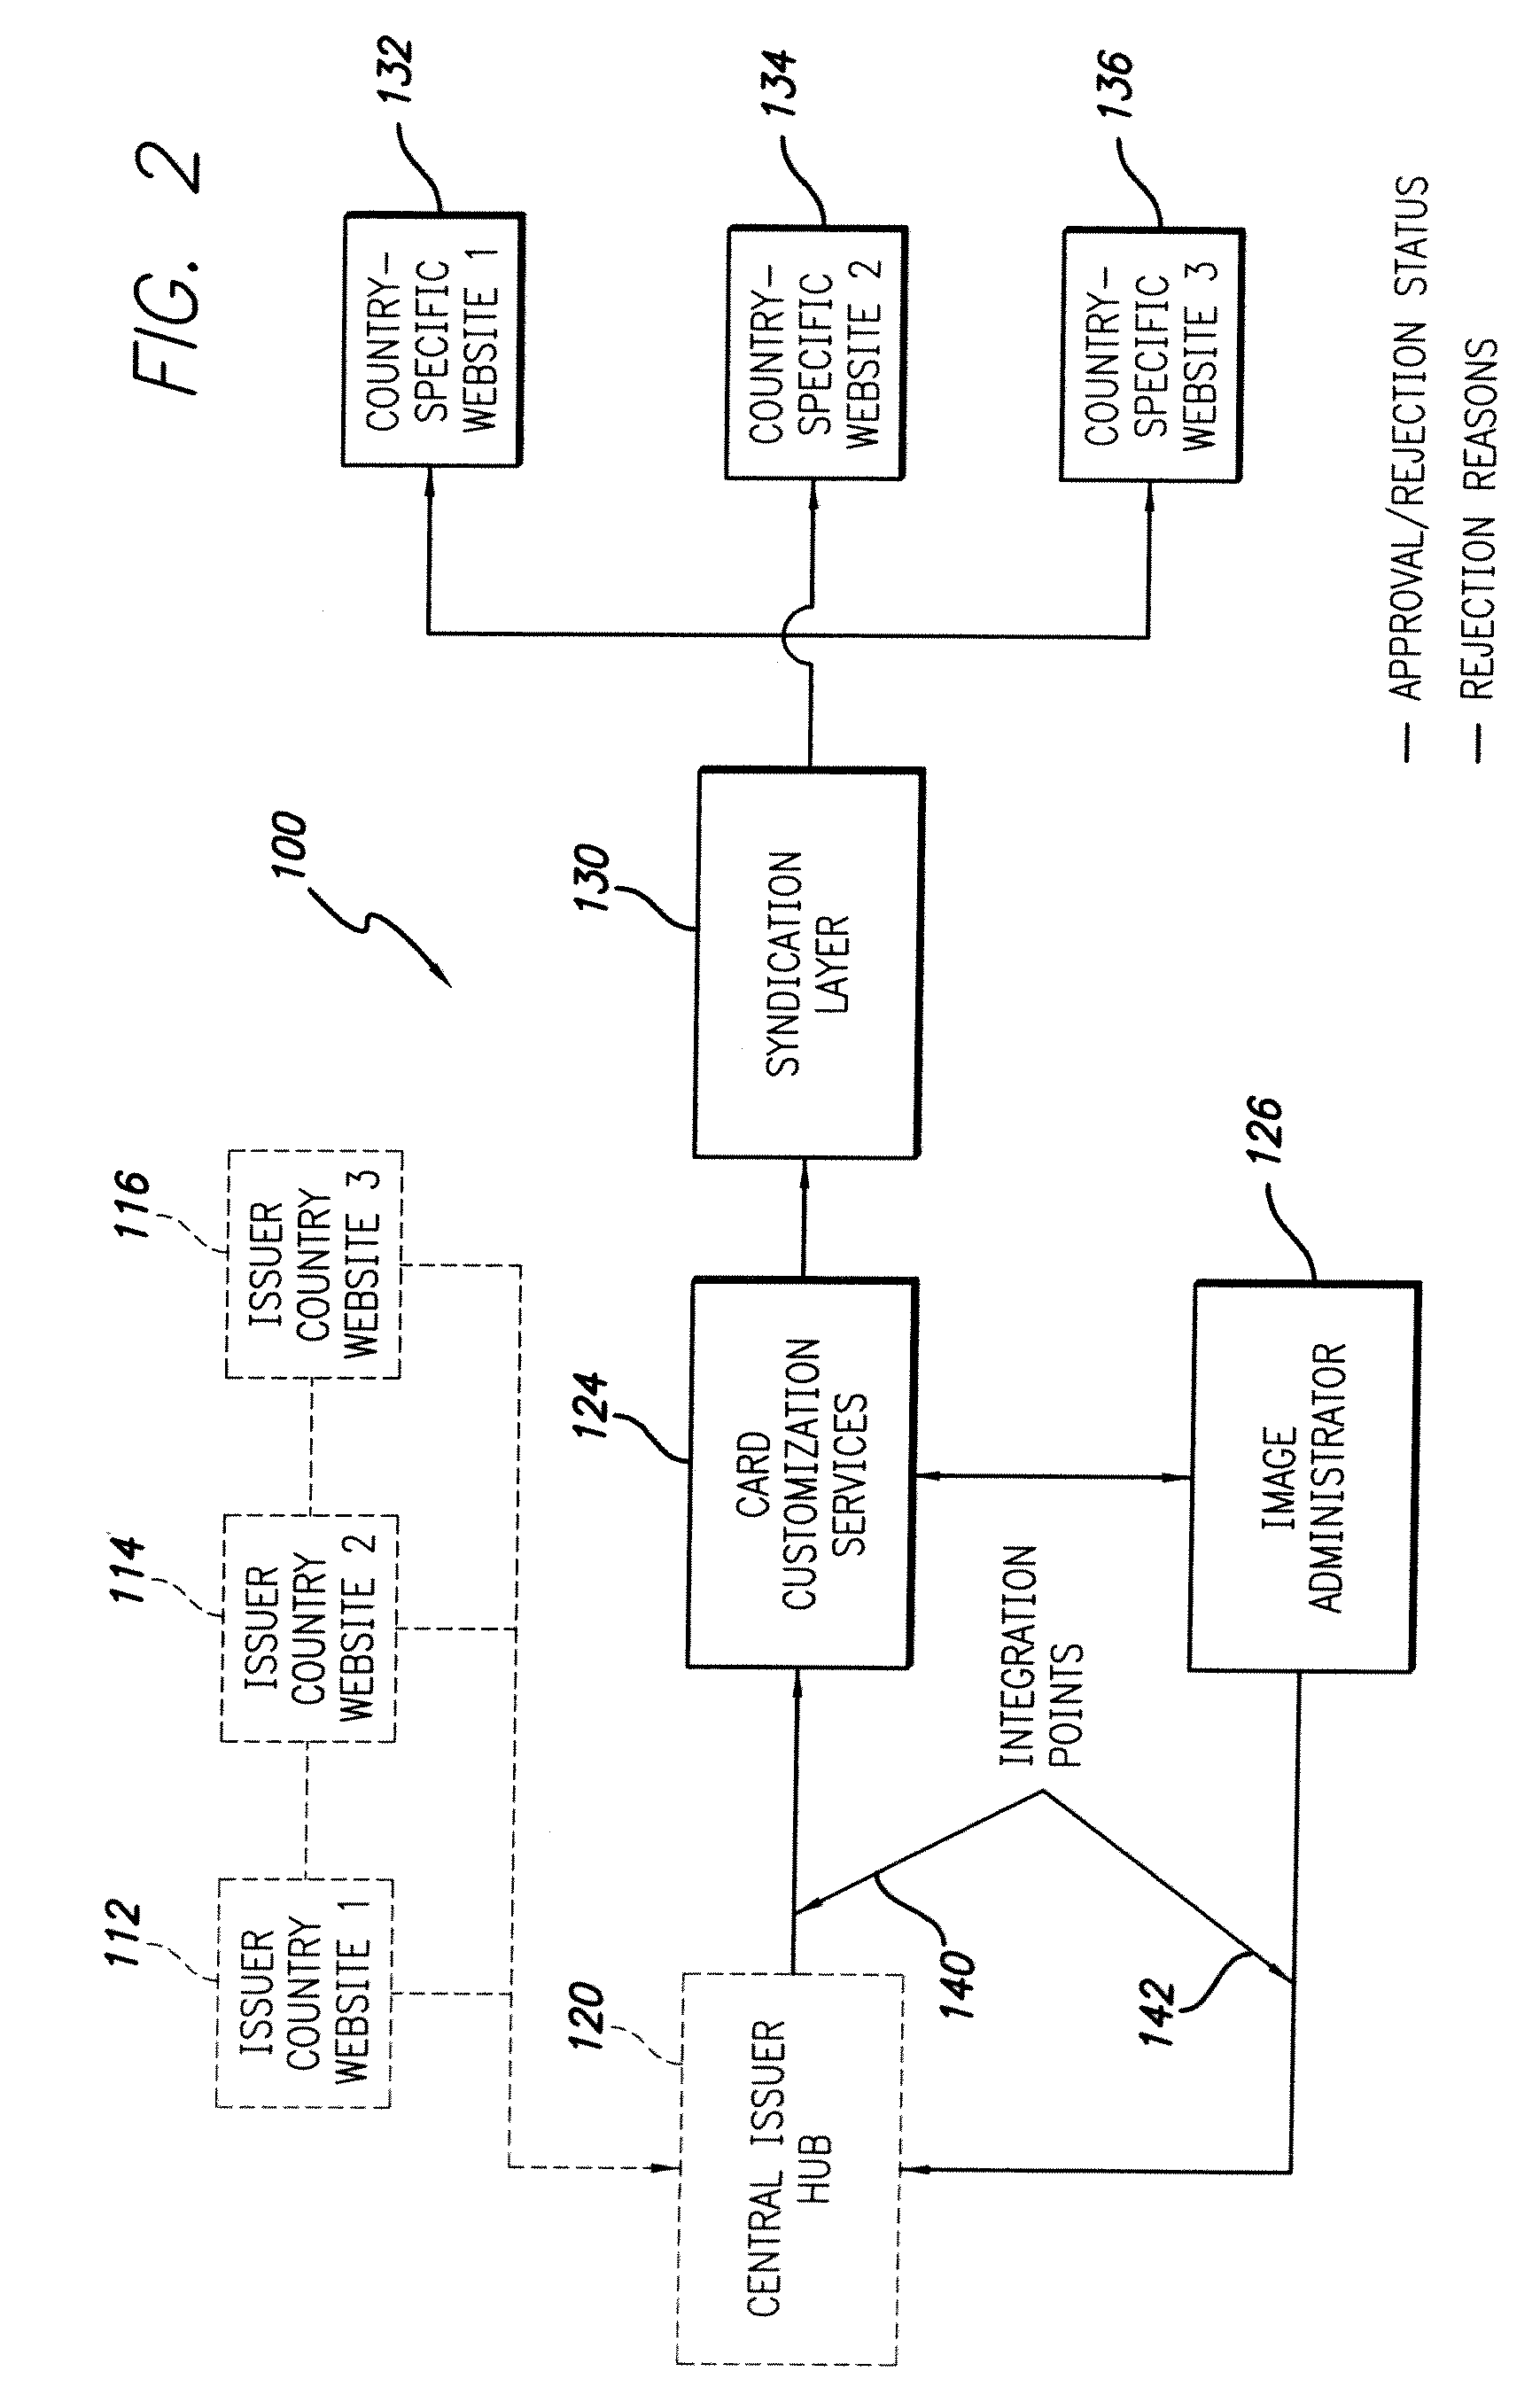 Methods for providing long term storage and retrieval of customized transaction card images